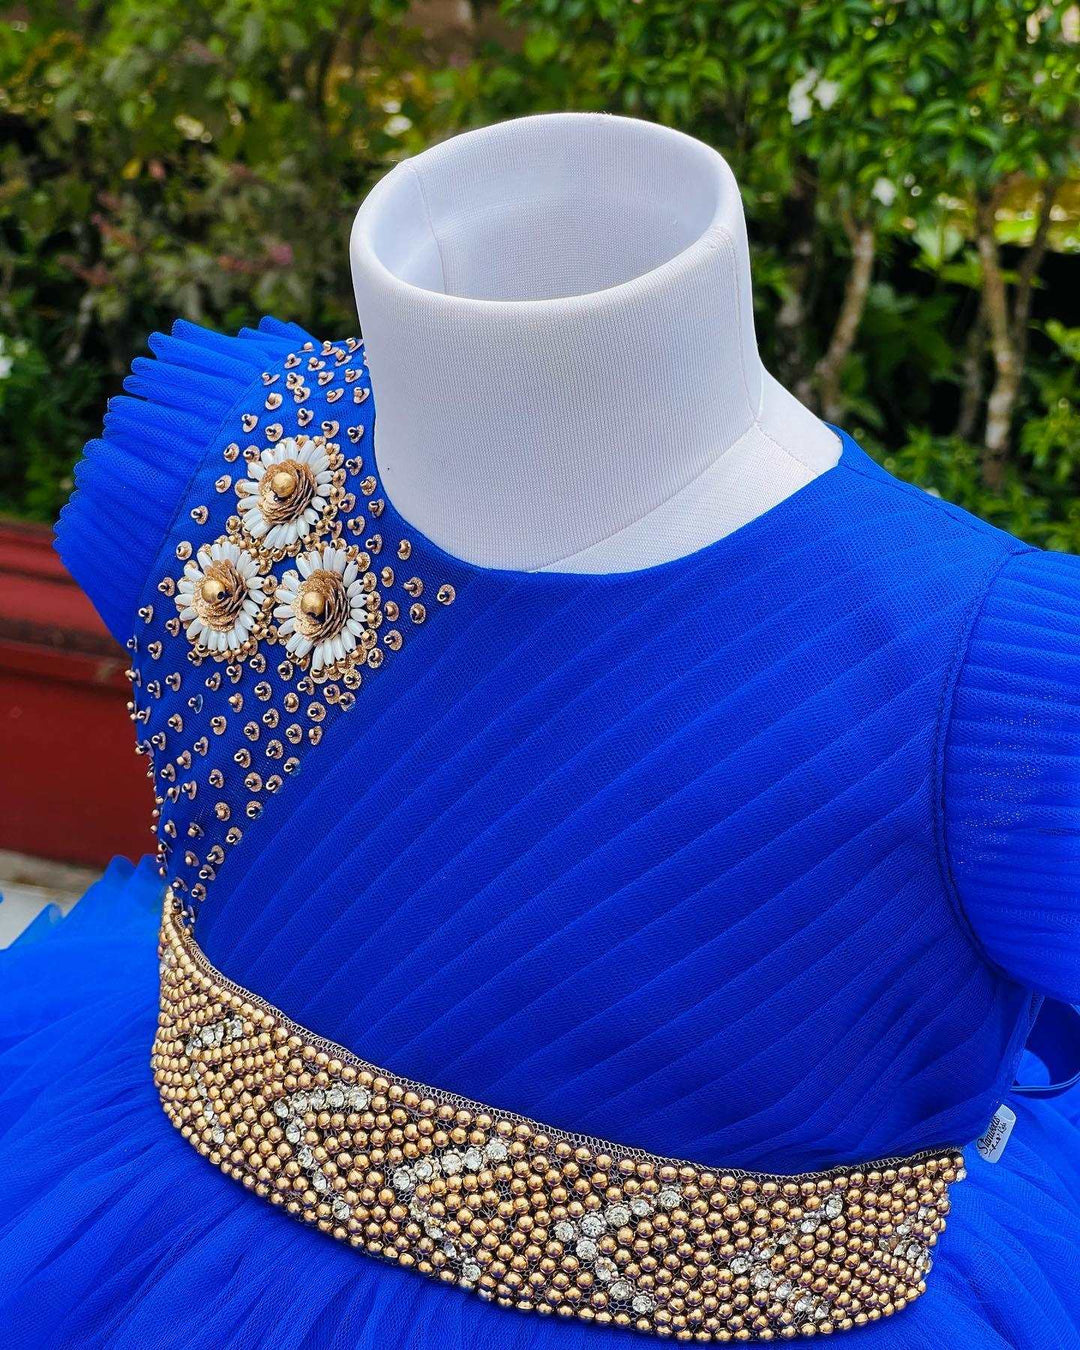 Royalblue Layered Pleated Heavy Ruffled Hand embroidery Birthday Frock

Material: Royalblue nylon mono net with layered and ruffles on the end portion. Yoke portion is designed with pleated pattern and a handwork in the centre portion.